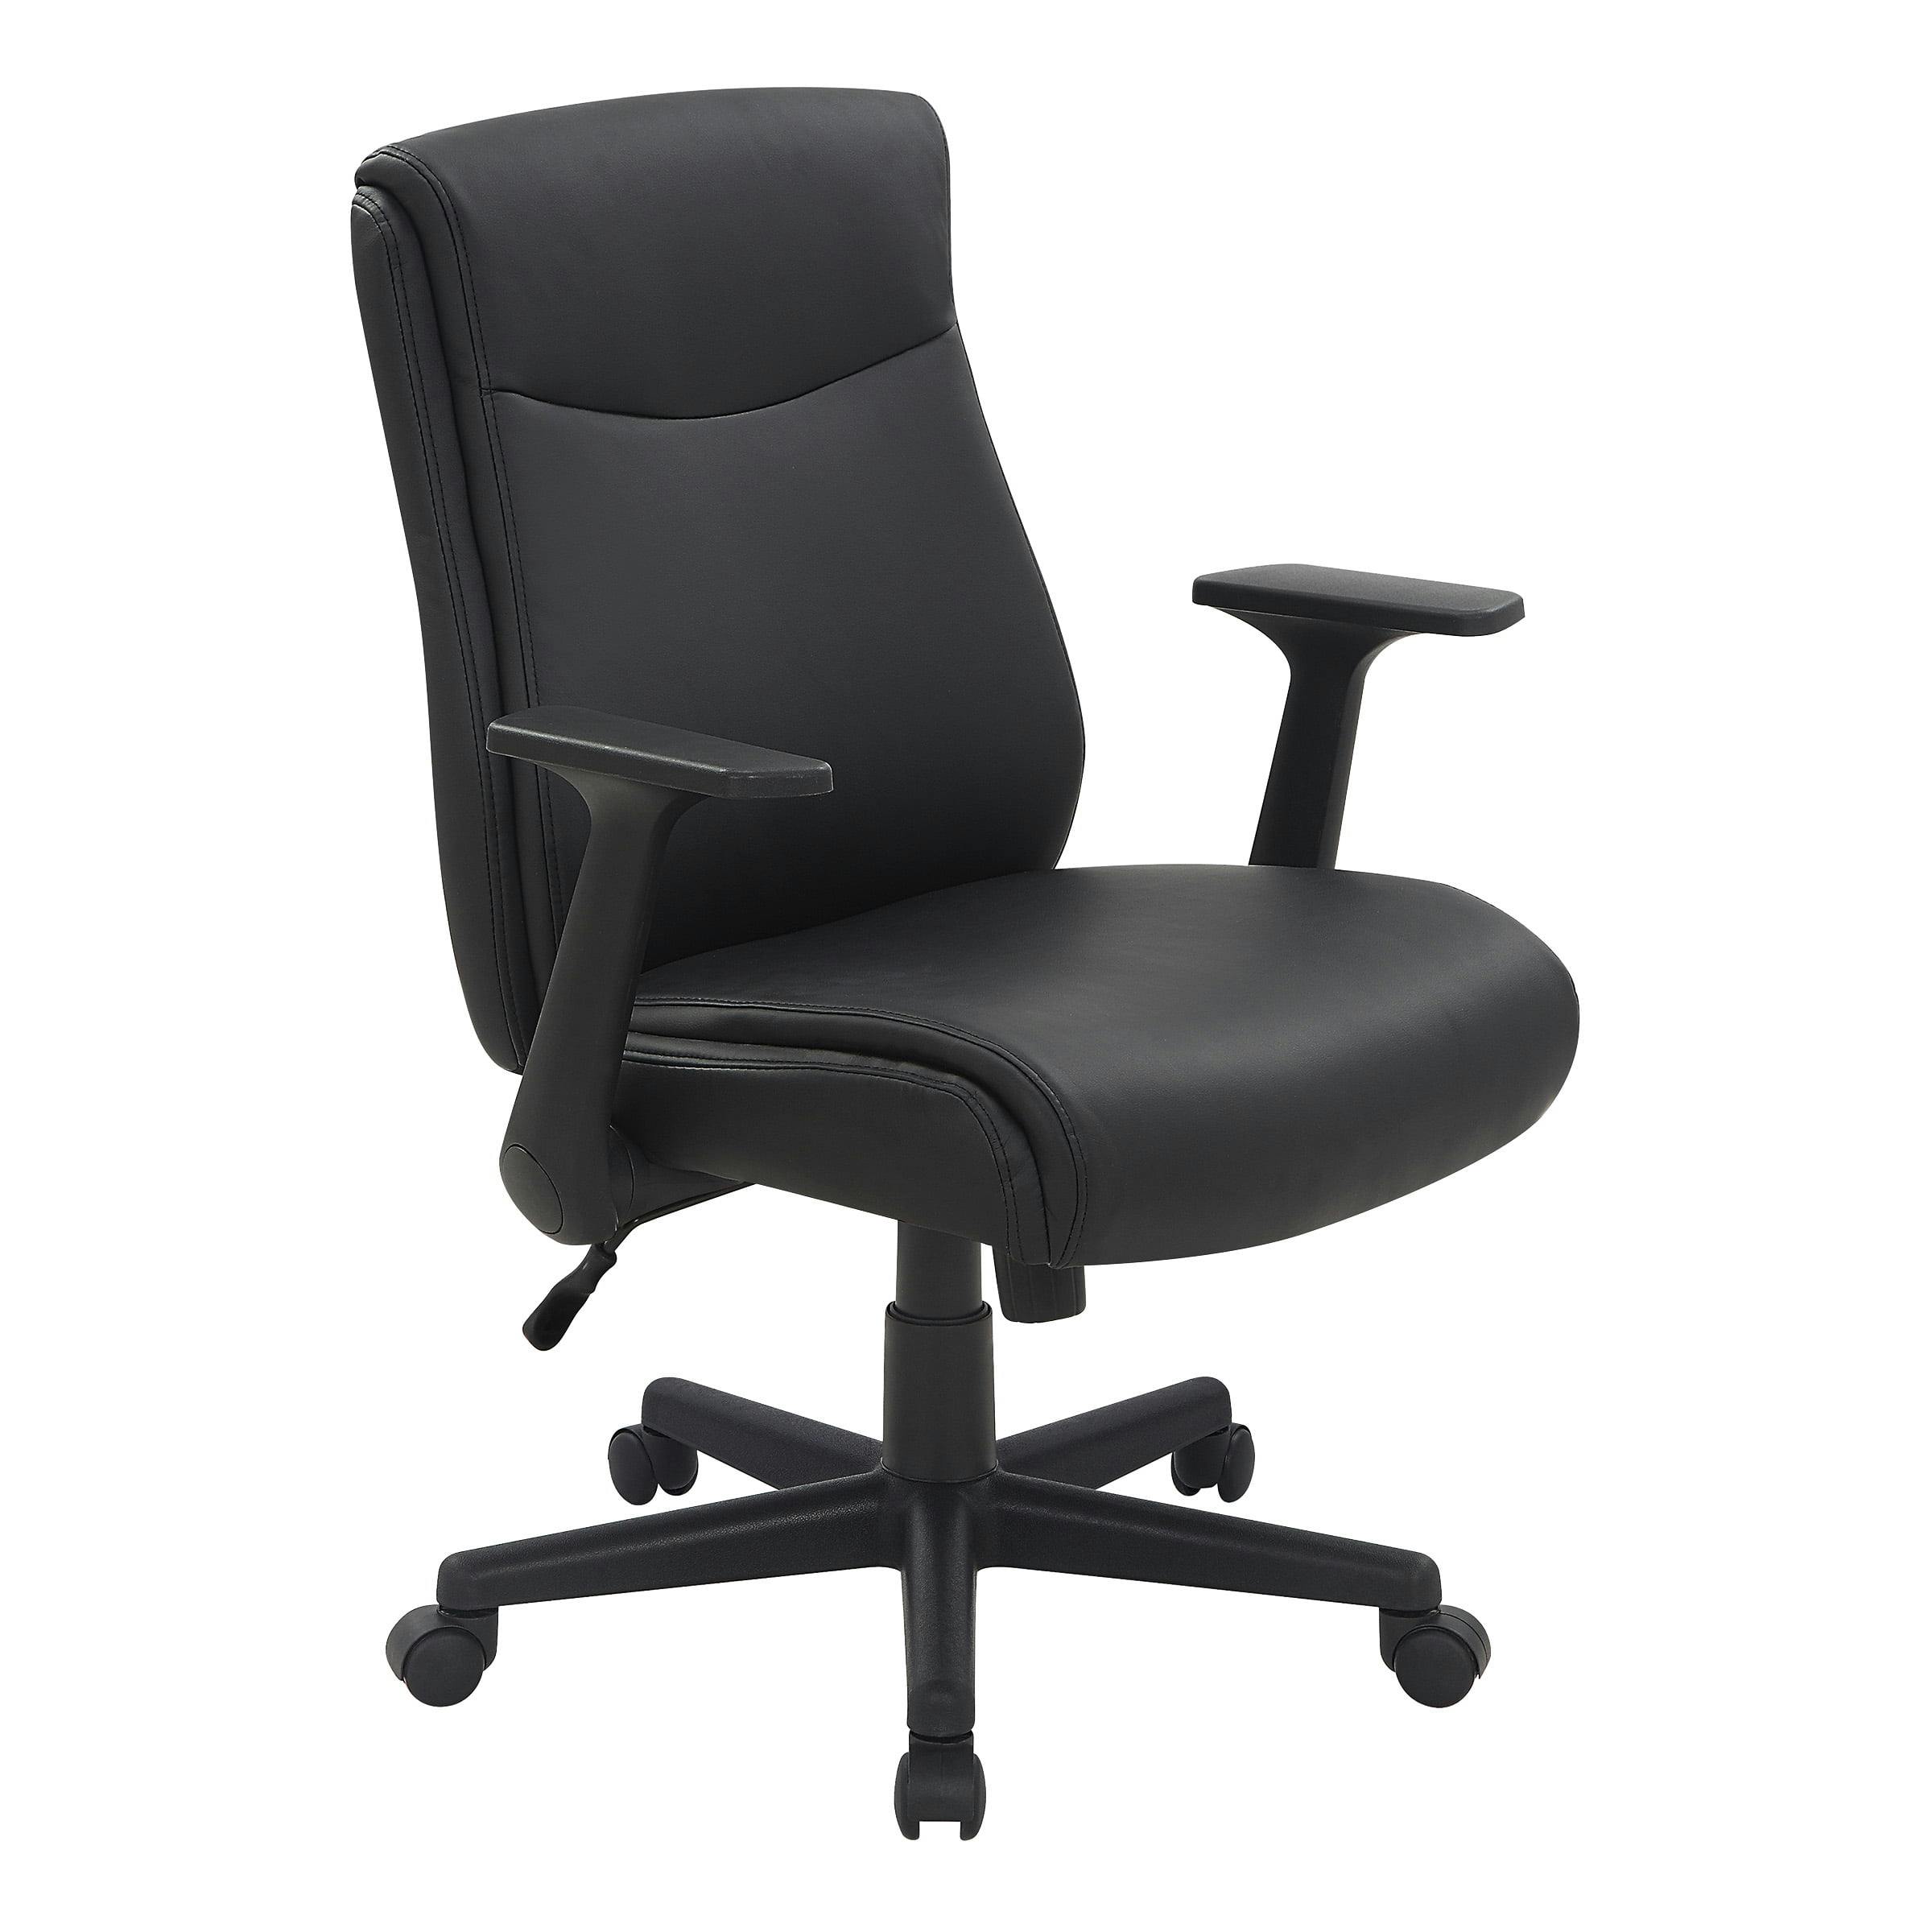 Executive High-Back Swivel Chair in Black Faux Leather with Metal Accents